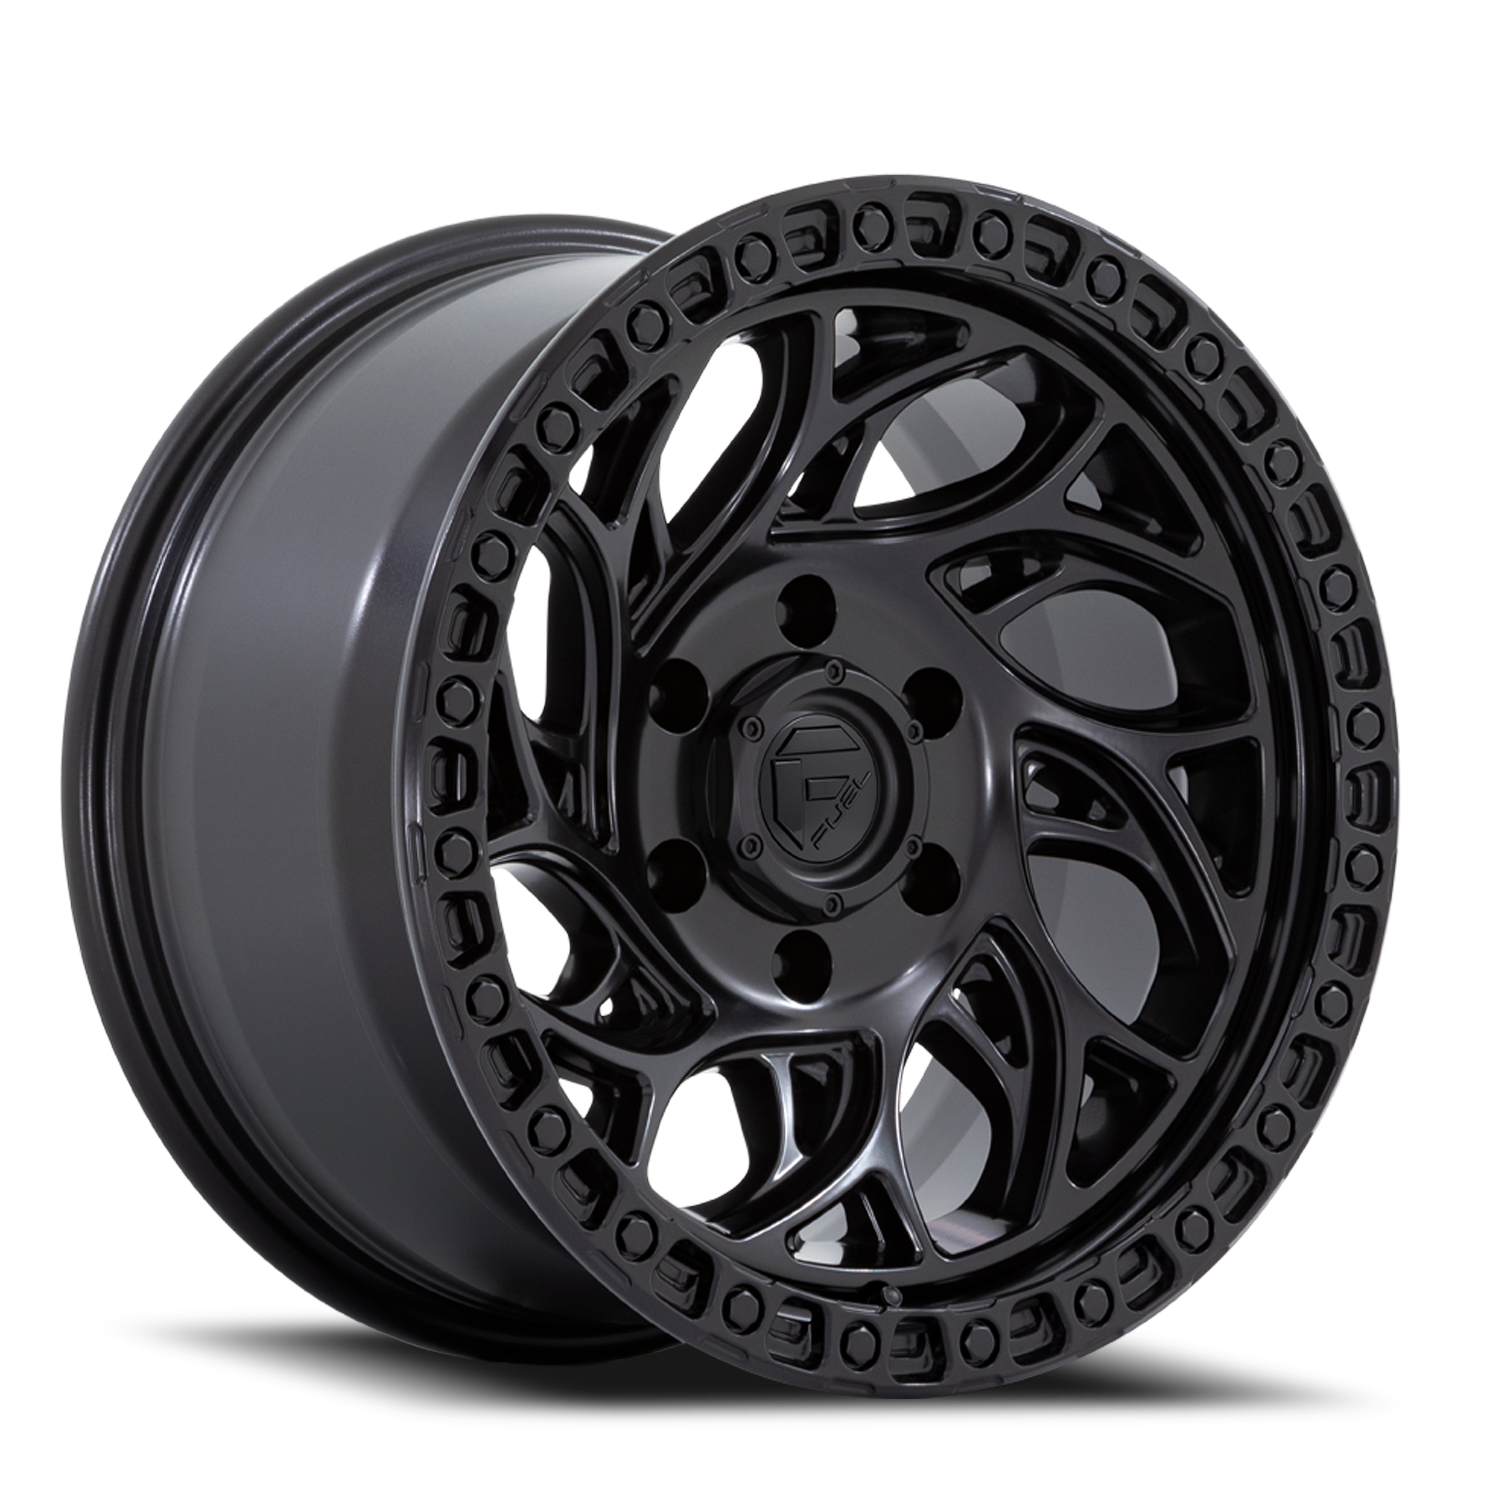 Aluminum Wheels 18X9 Runner OR D852 6 On 114.3 Blackout 66.06 Bore 1 Offset Fuel Off Road Wheels